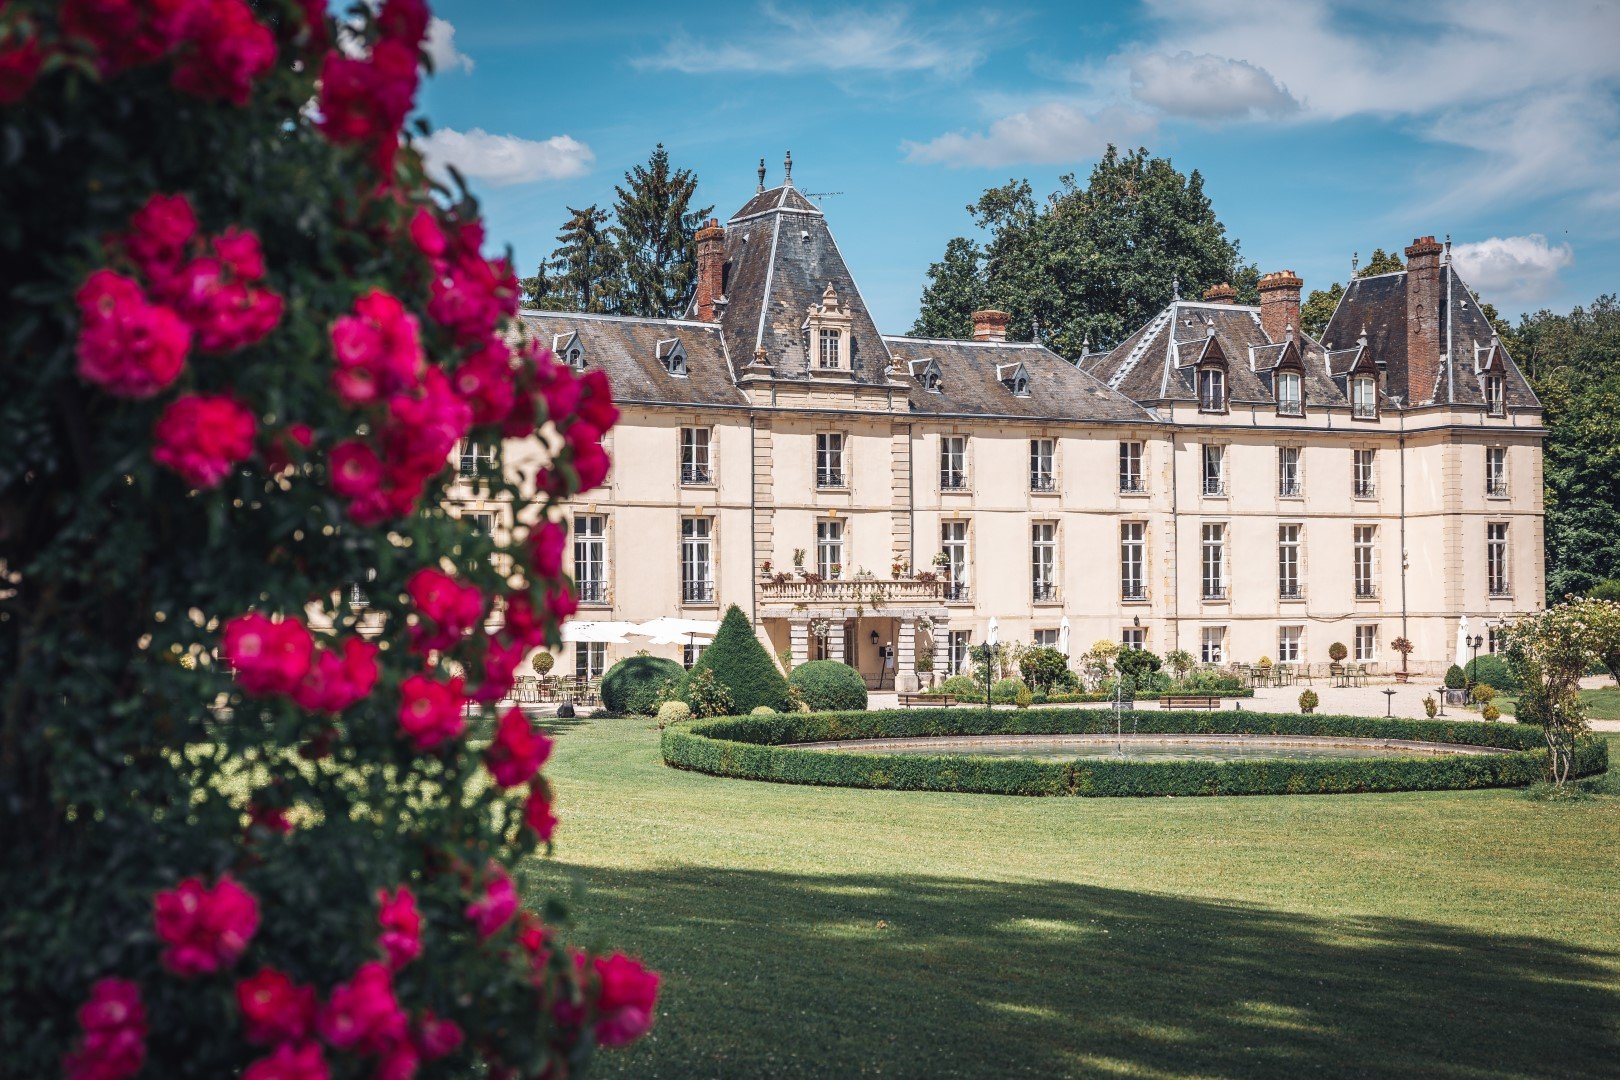 Country view of the château and flowers in the garden 